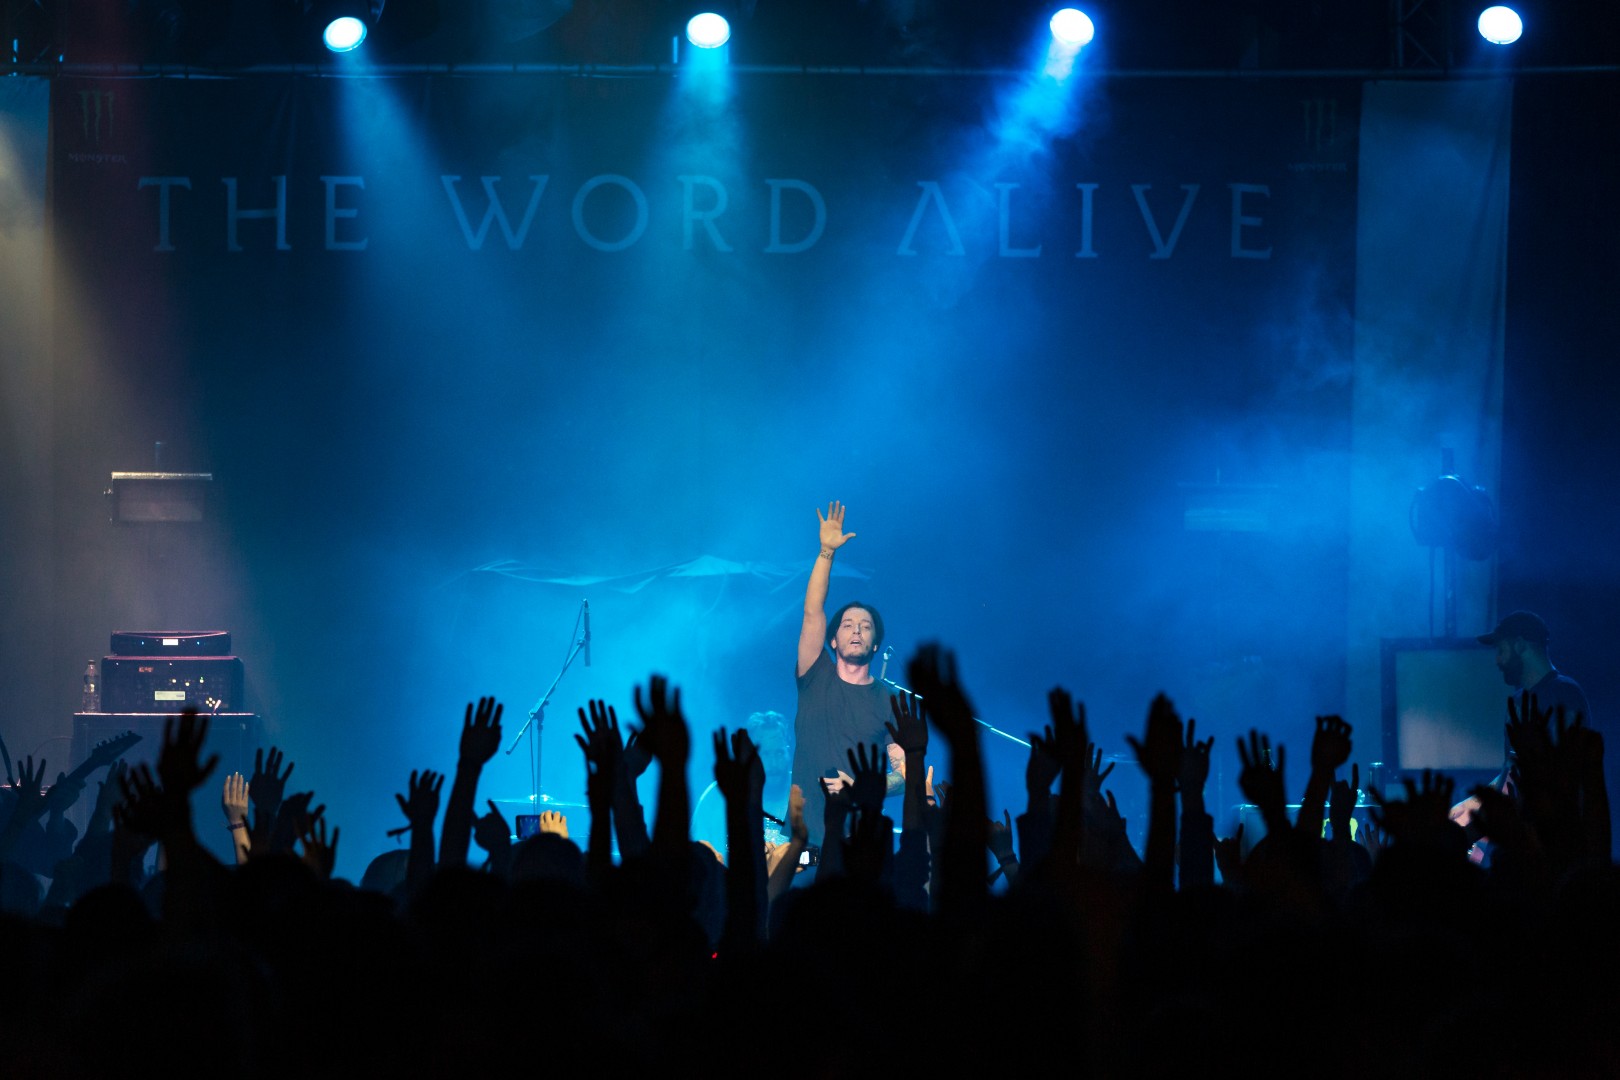 The Word Alive at Arenele Romane in Bucharest on March 12, 2017 (8acd1f6d0d)